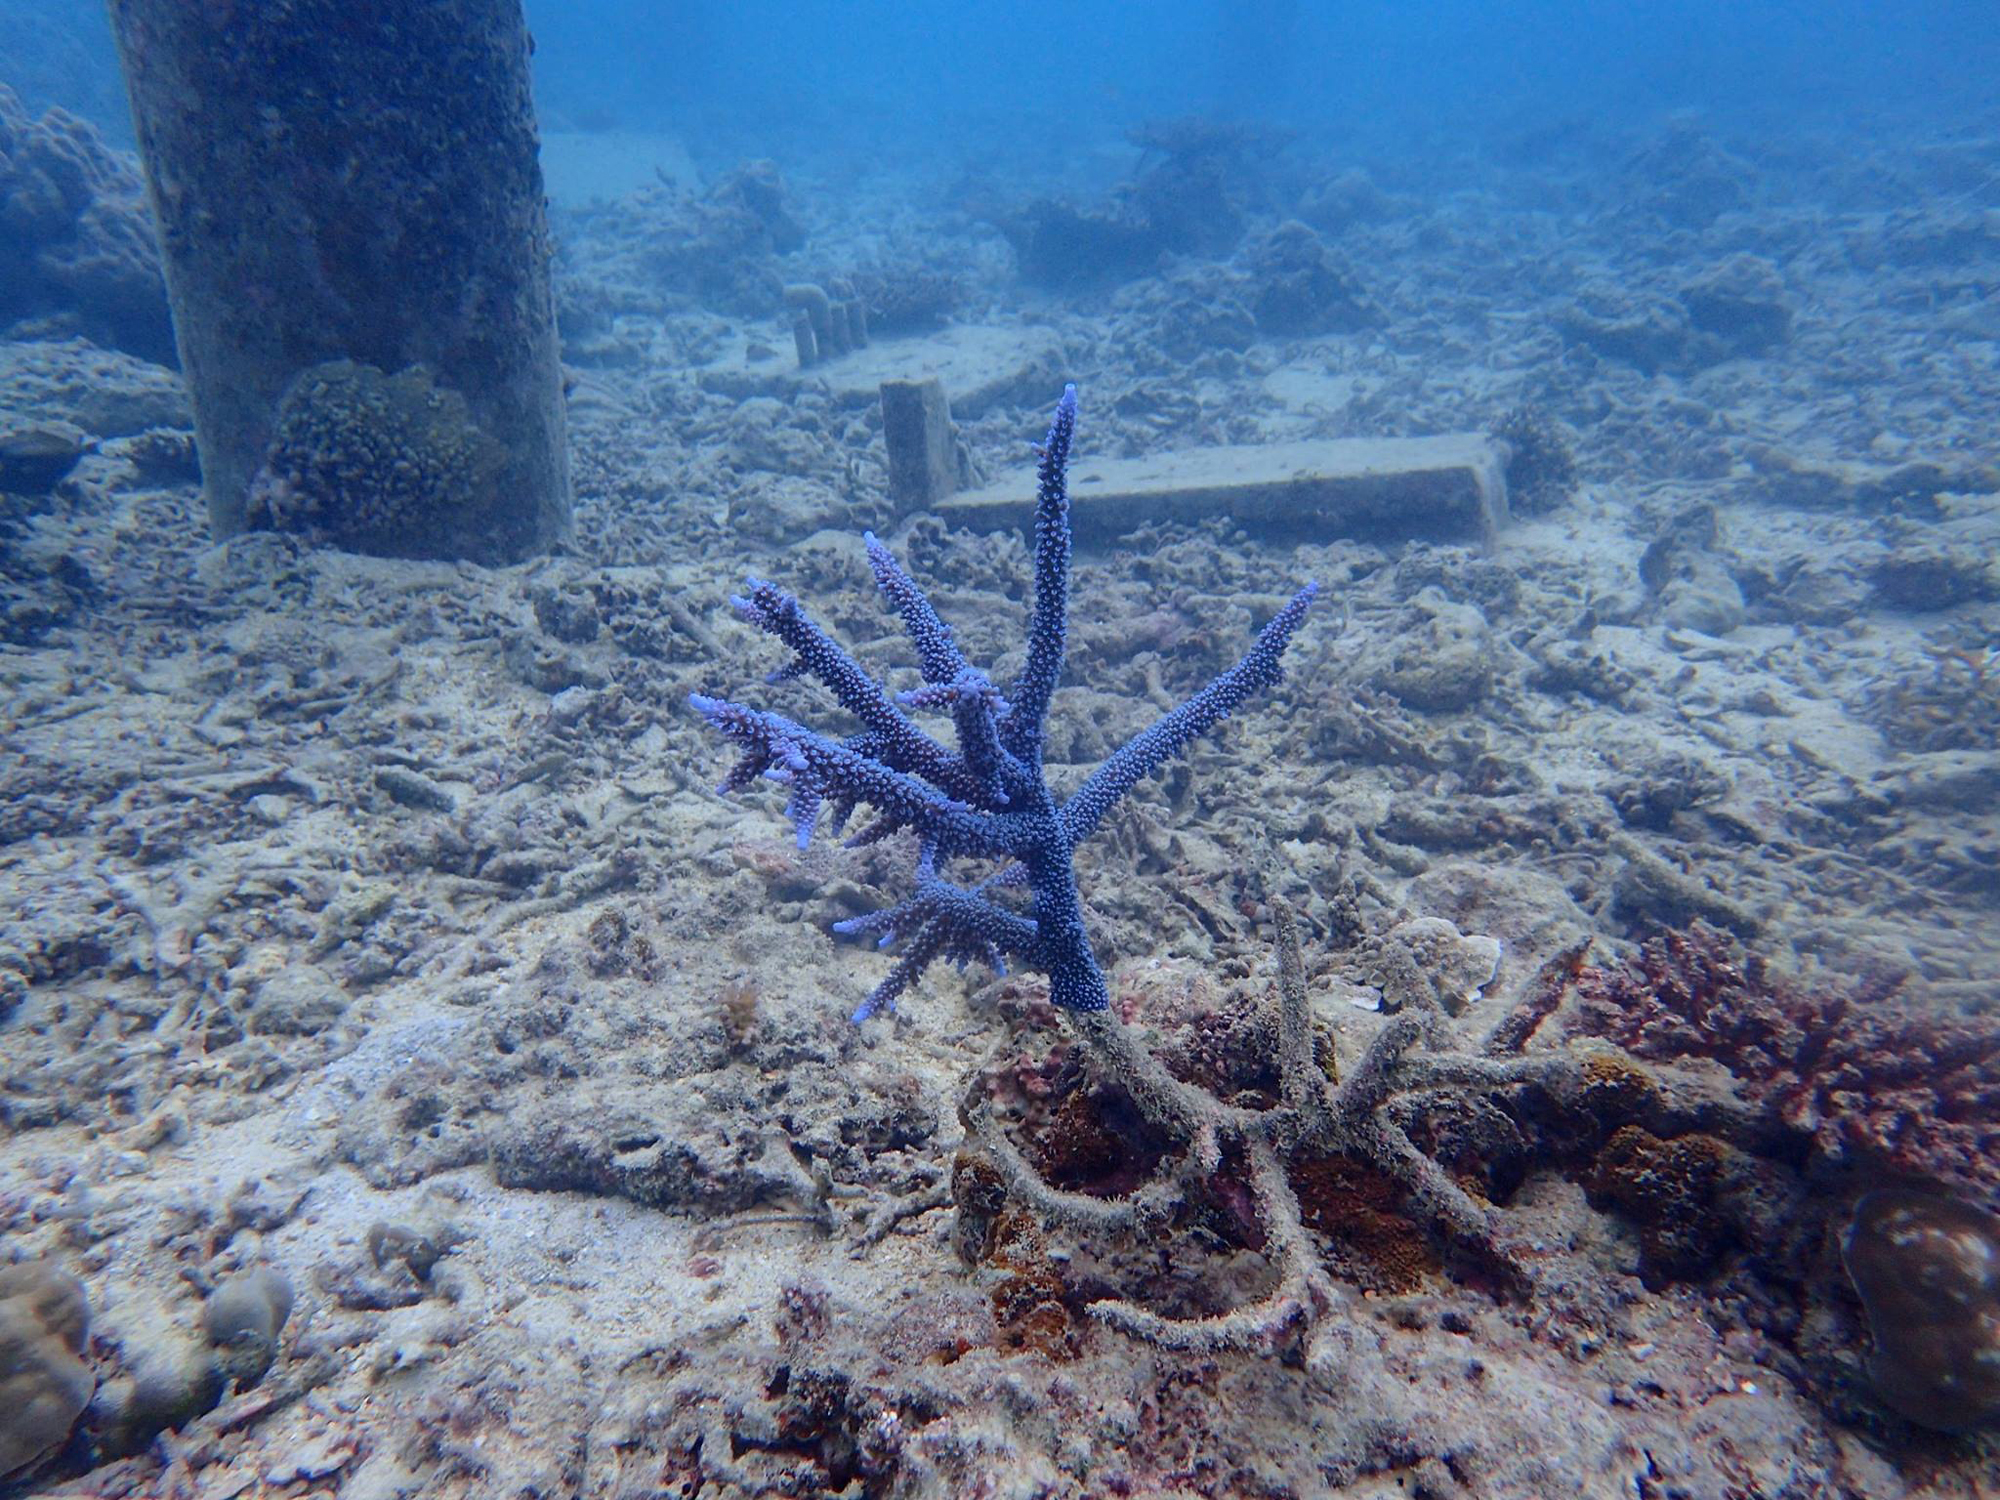 A photo from one of Diving School Umicoza's dives in 2017 shows a single blue branching coral amid the brown rubble of a collapsed reef. | COURTESY OF DIVING SCHOOL UMICOZA